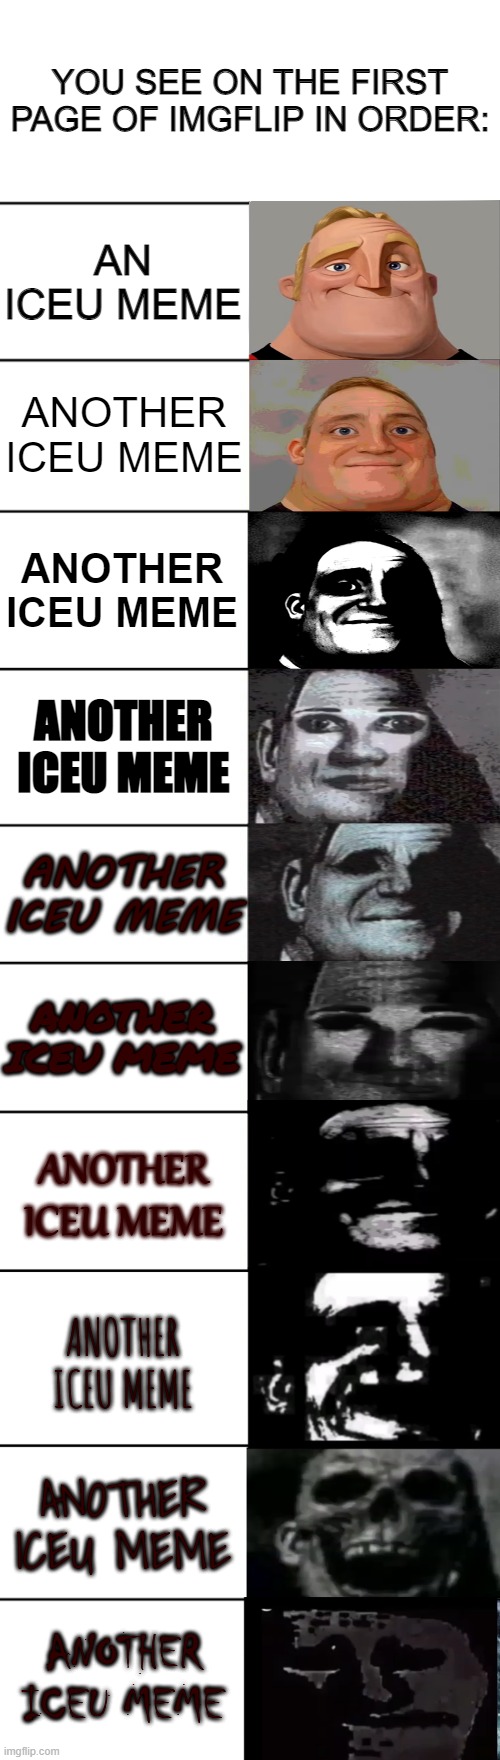 Iceu is going to take over imgflip one day |  YOU SEE ON THE FIRST PAGE OF IMGFLIP IN ORDER:; AN ICEU MEME; ANOTHER ICEU MEME; ANOTHER ICEU MEME; ANOTHER ICEU MEME; ANOTHER ICEU MEME; ANOTHER ICEU MEME; ANOTHER ICEU MEME; ANOTHER ICEU MEME; ANOTHER ICEU MEME; ANOTHER ICEU MEME | image tagged in mr incredible becoming uncanny,another iceu meme,made you look,iceu | made w/ Imgflip meme maker